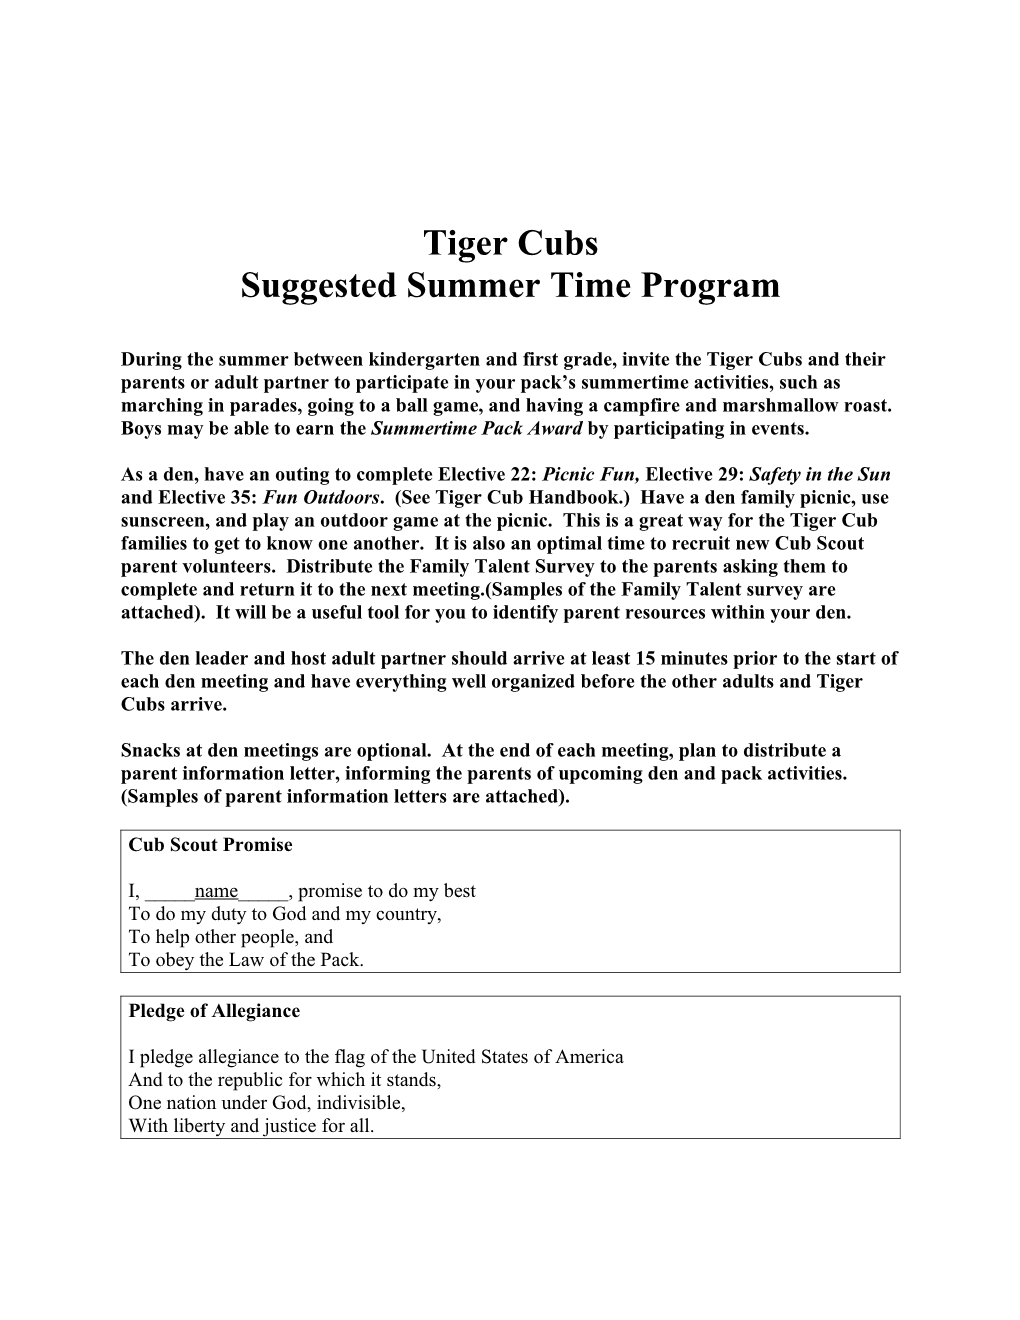 Suggested Summer Time Program